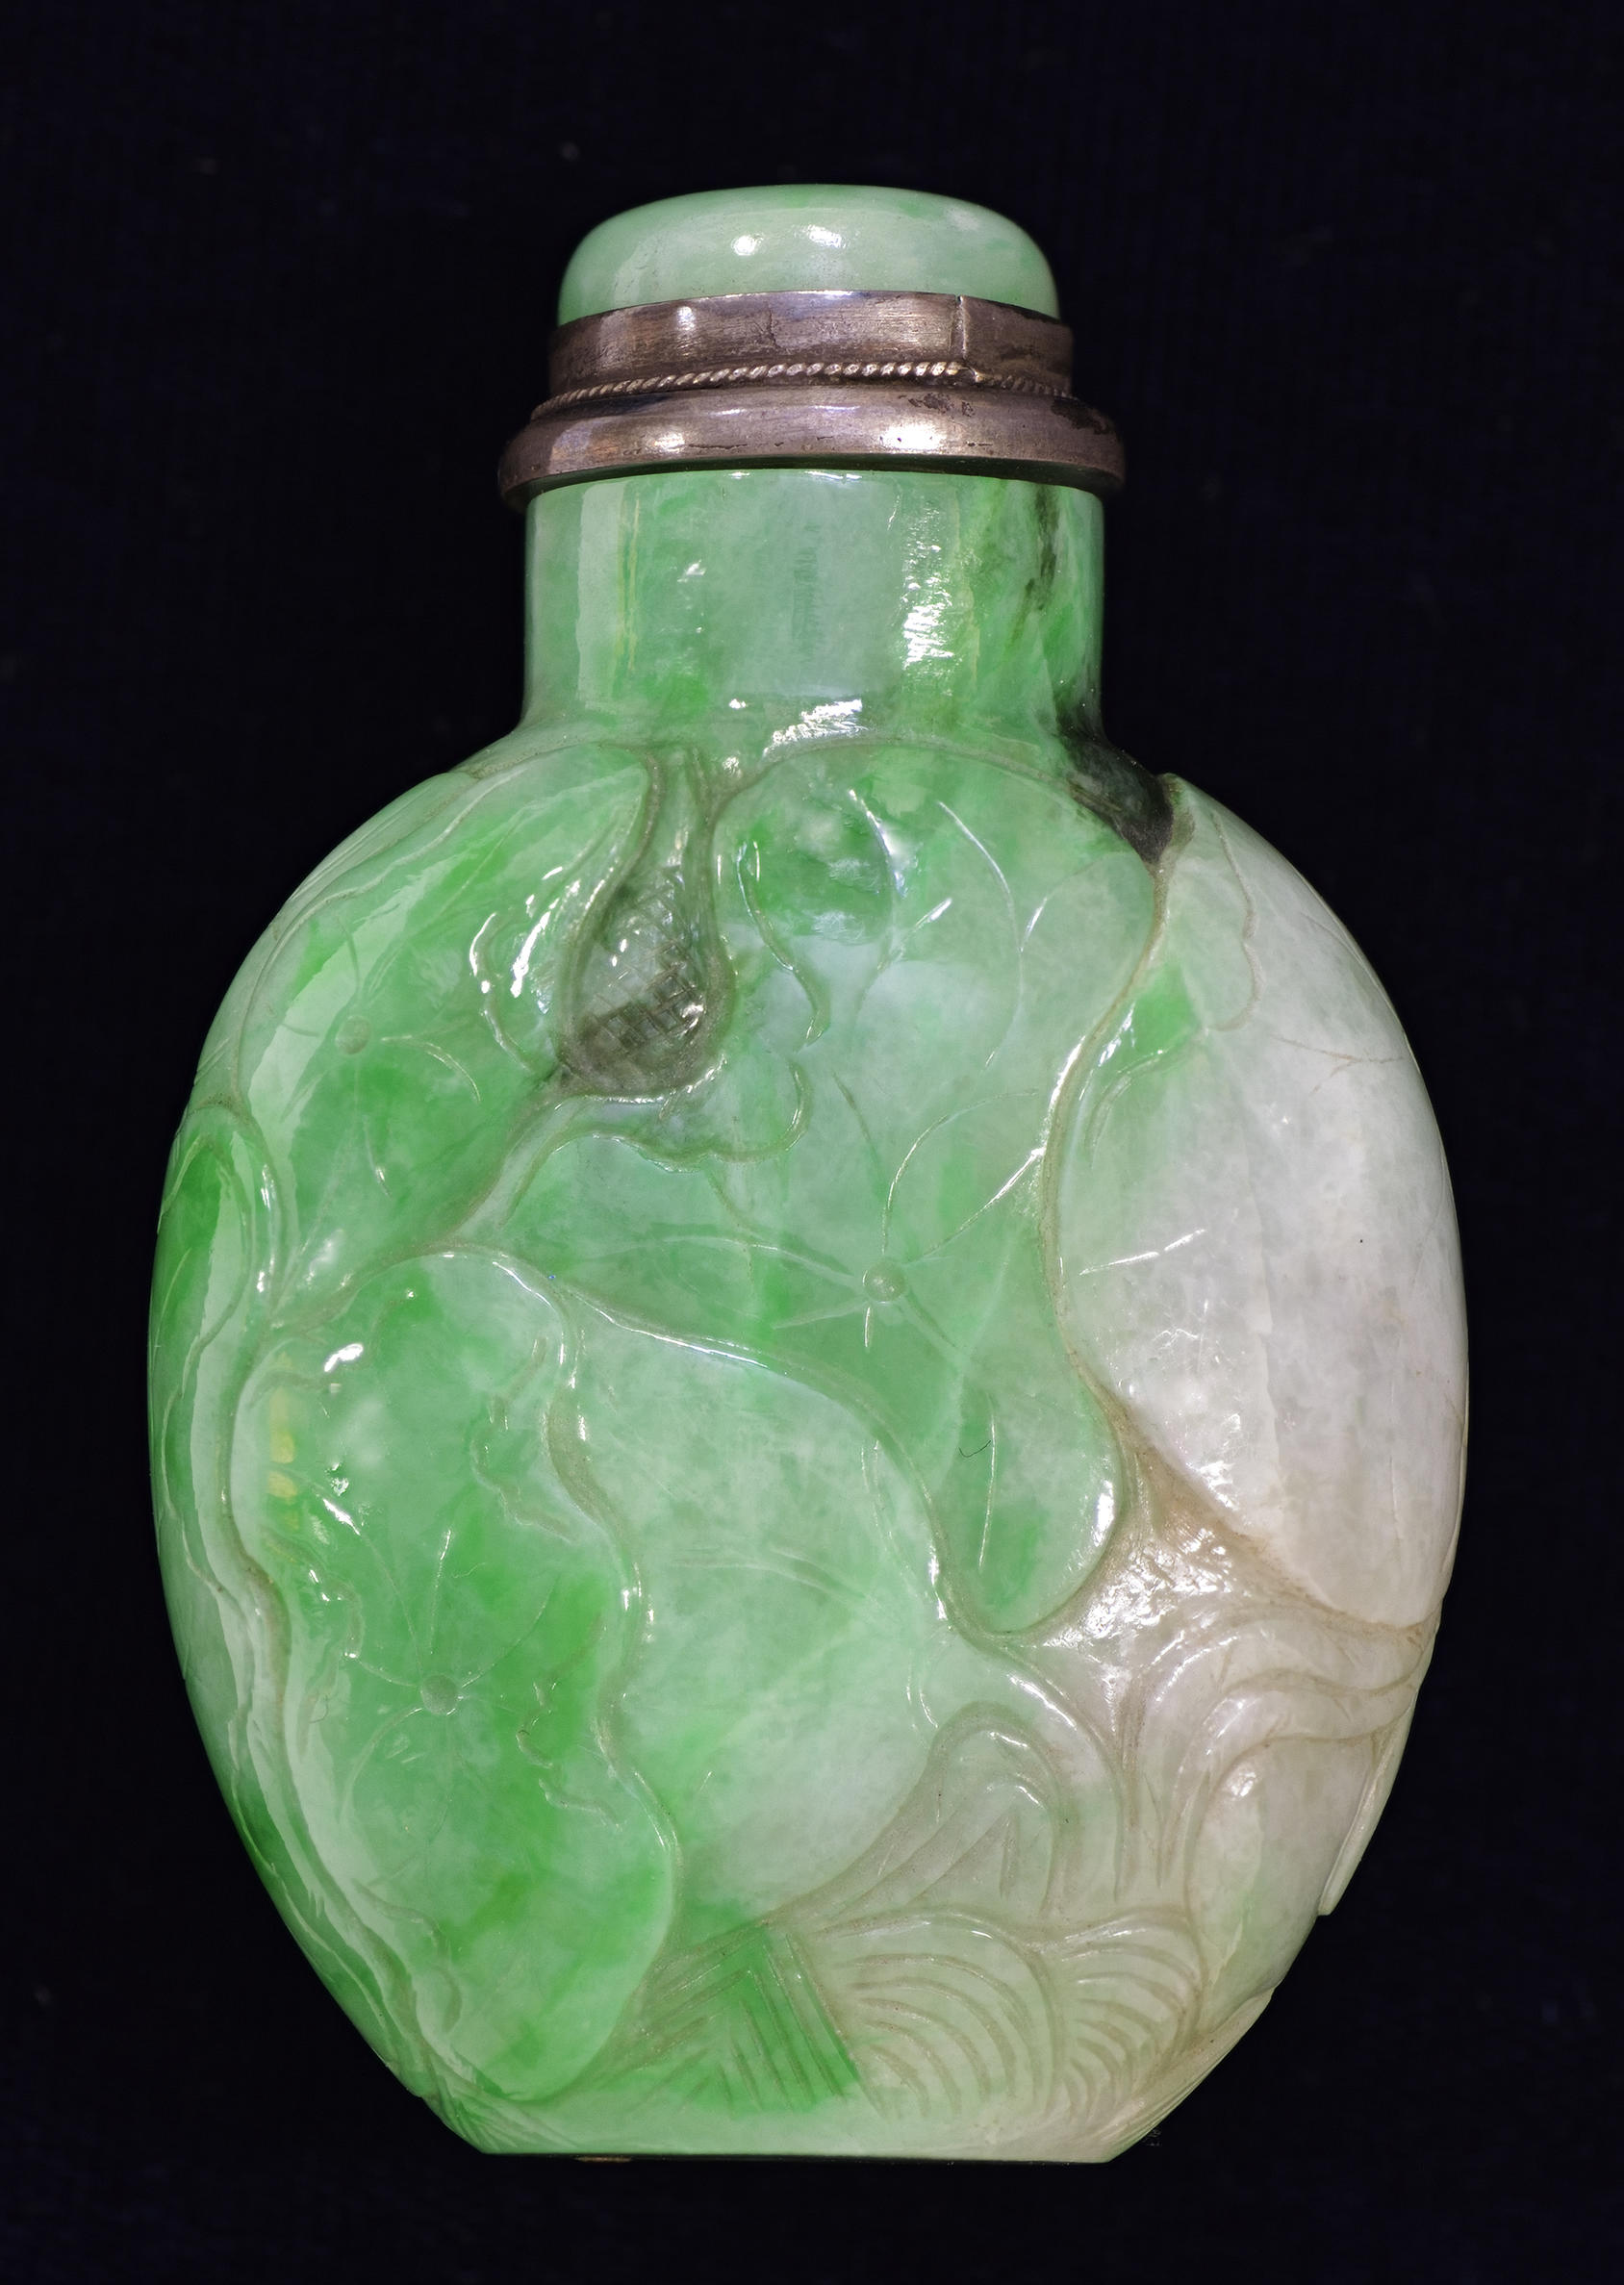 A green and white oval-shaped snuff bottle and stopper. There are nature motifs and patterns carved into the surface.